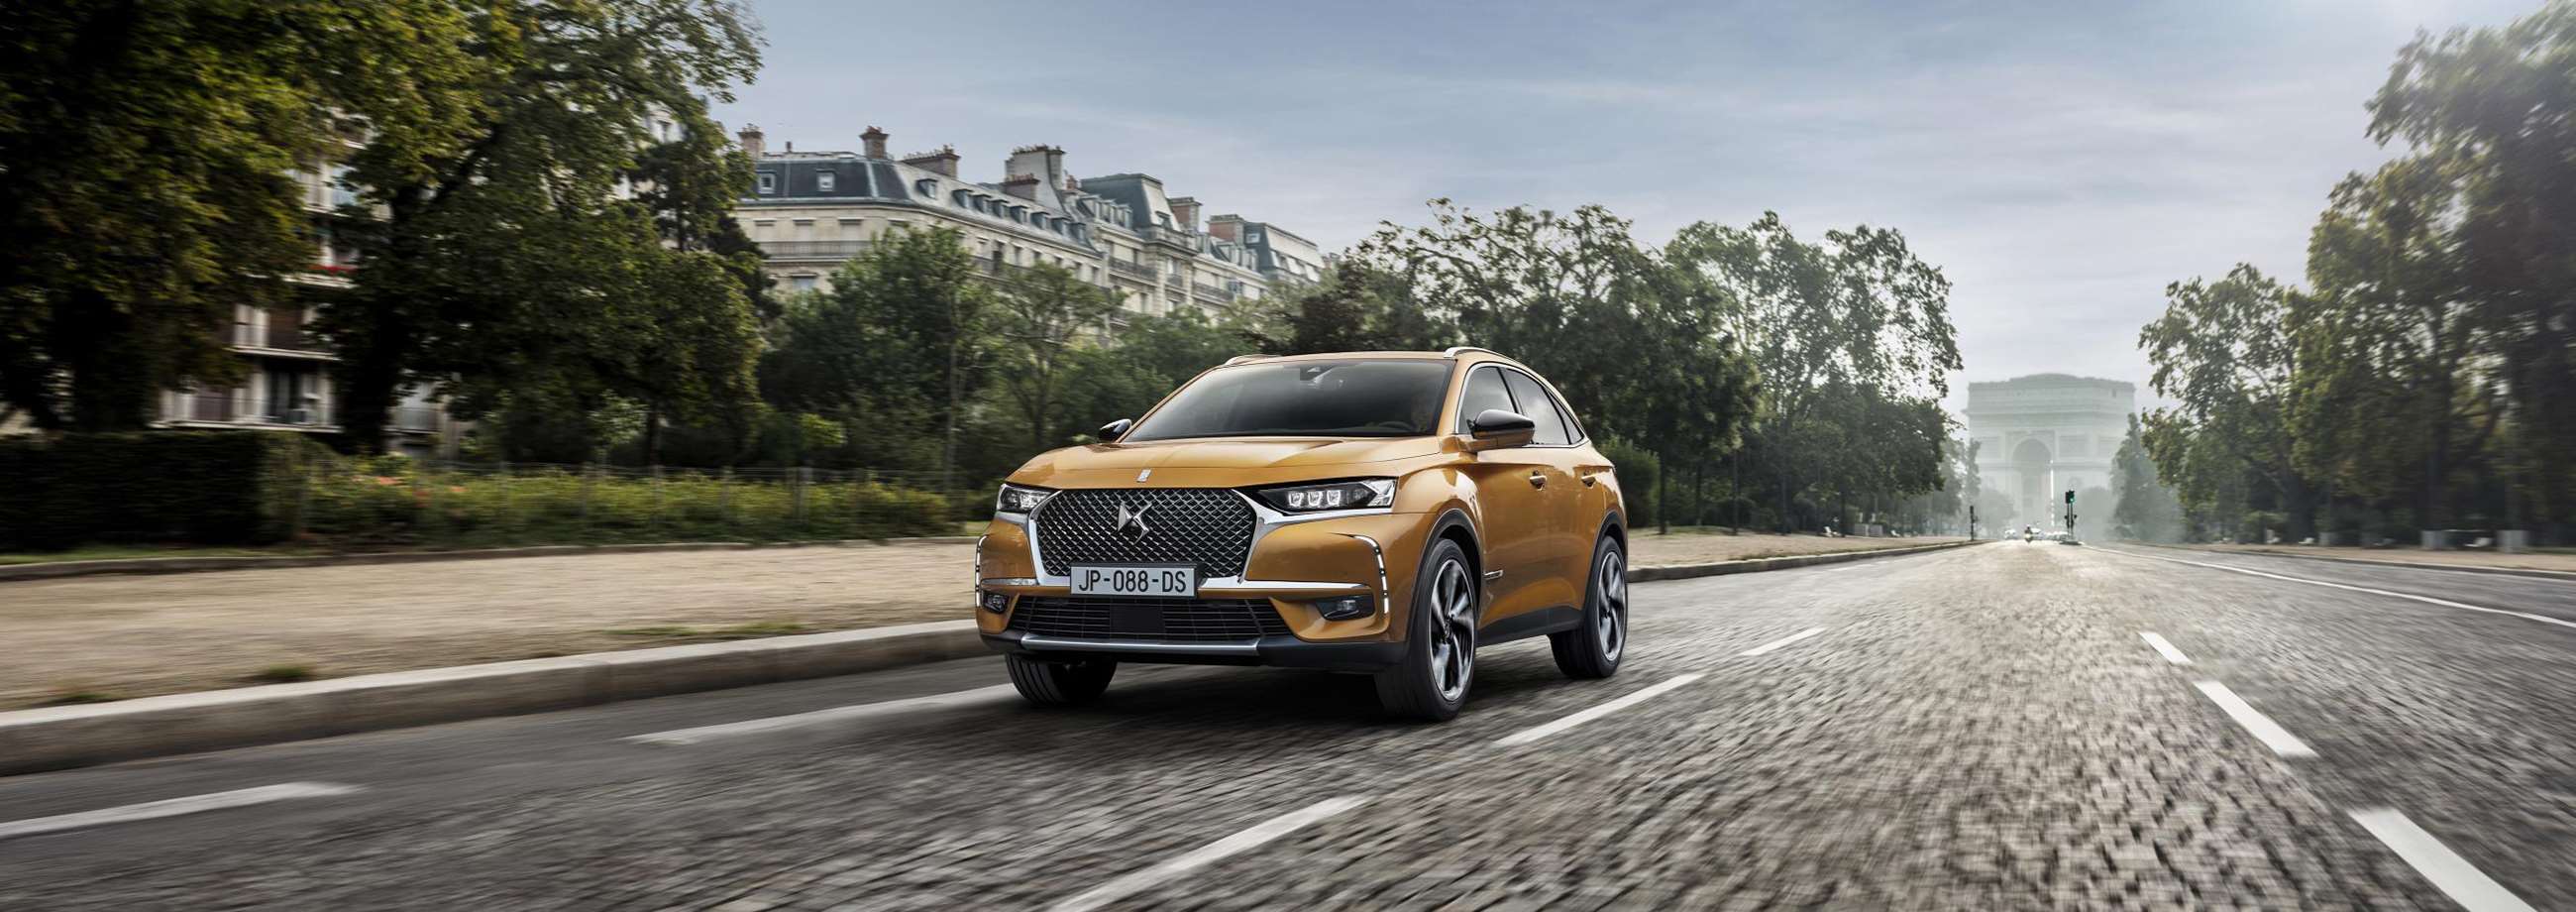 ds_automobiles_ds_7_crossback_first_drive_goodwood_25011805.jpg